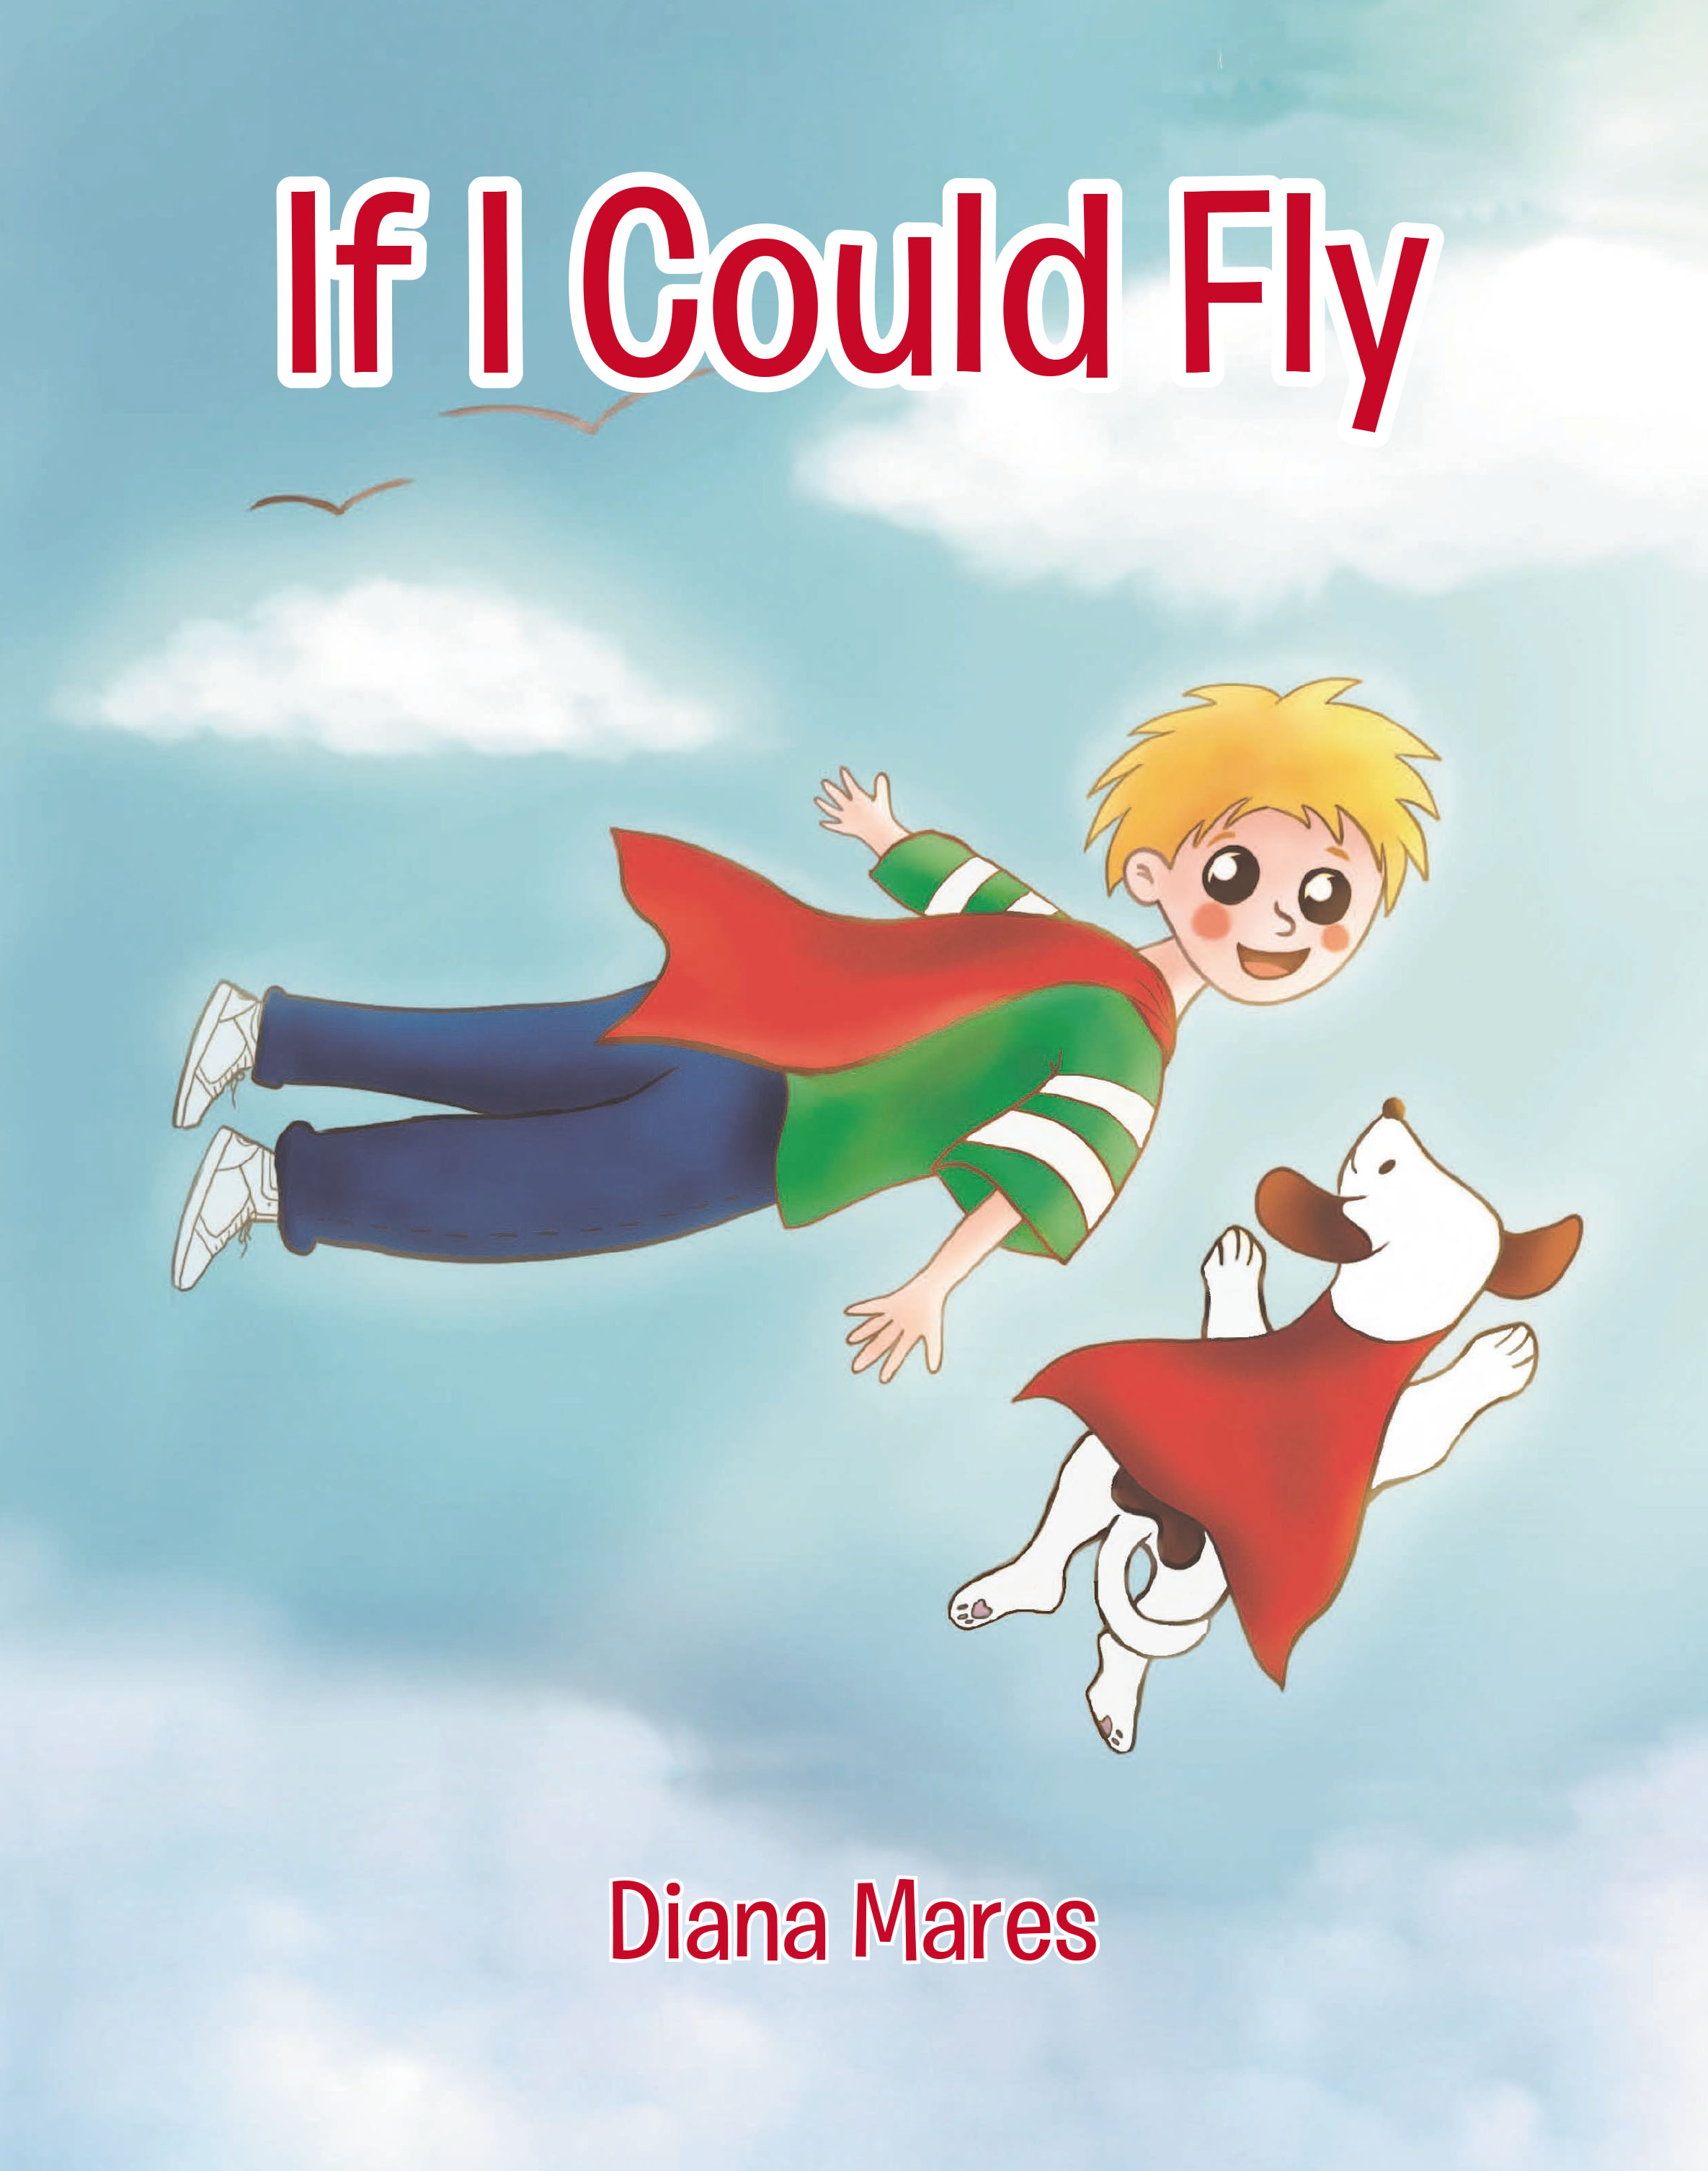 Diana Mares’s Newly Released "If I Could Fly" is a Sweet Story of a Precious Child with a Big Imagination and a Determined Spirit